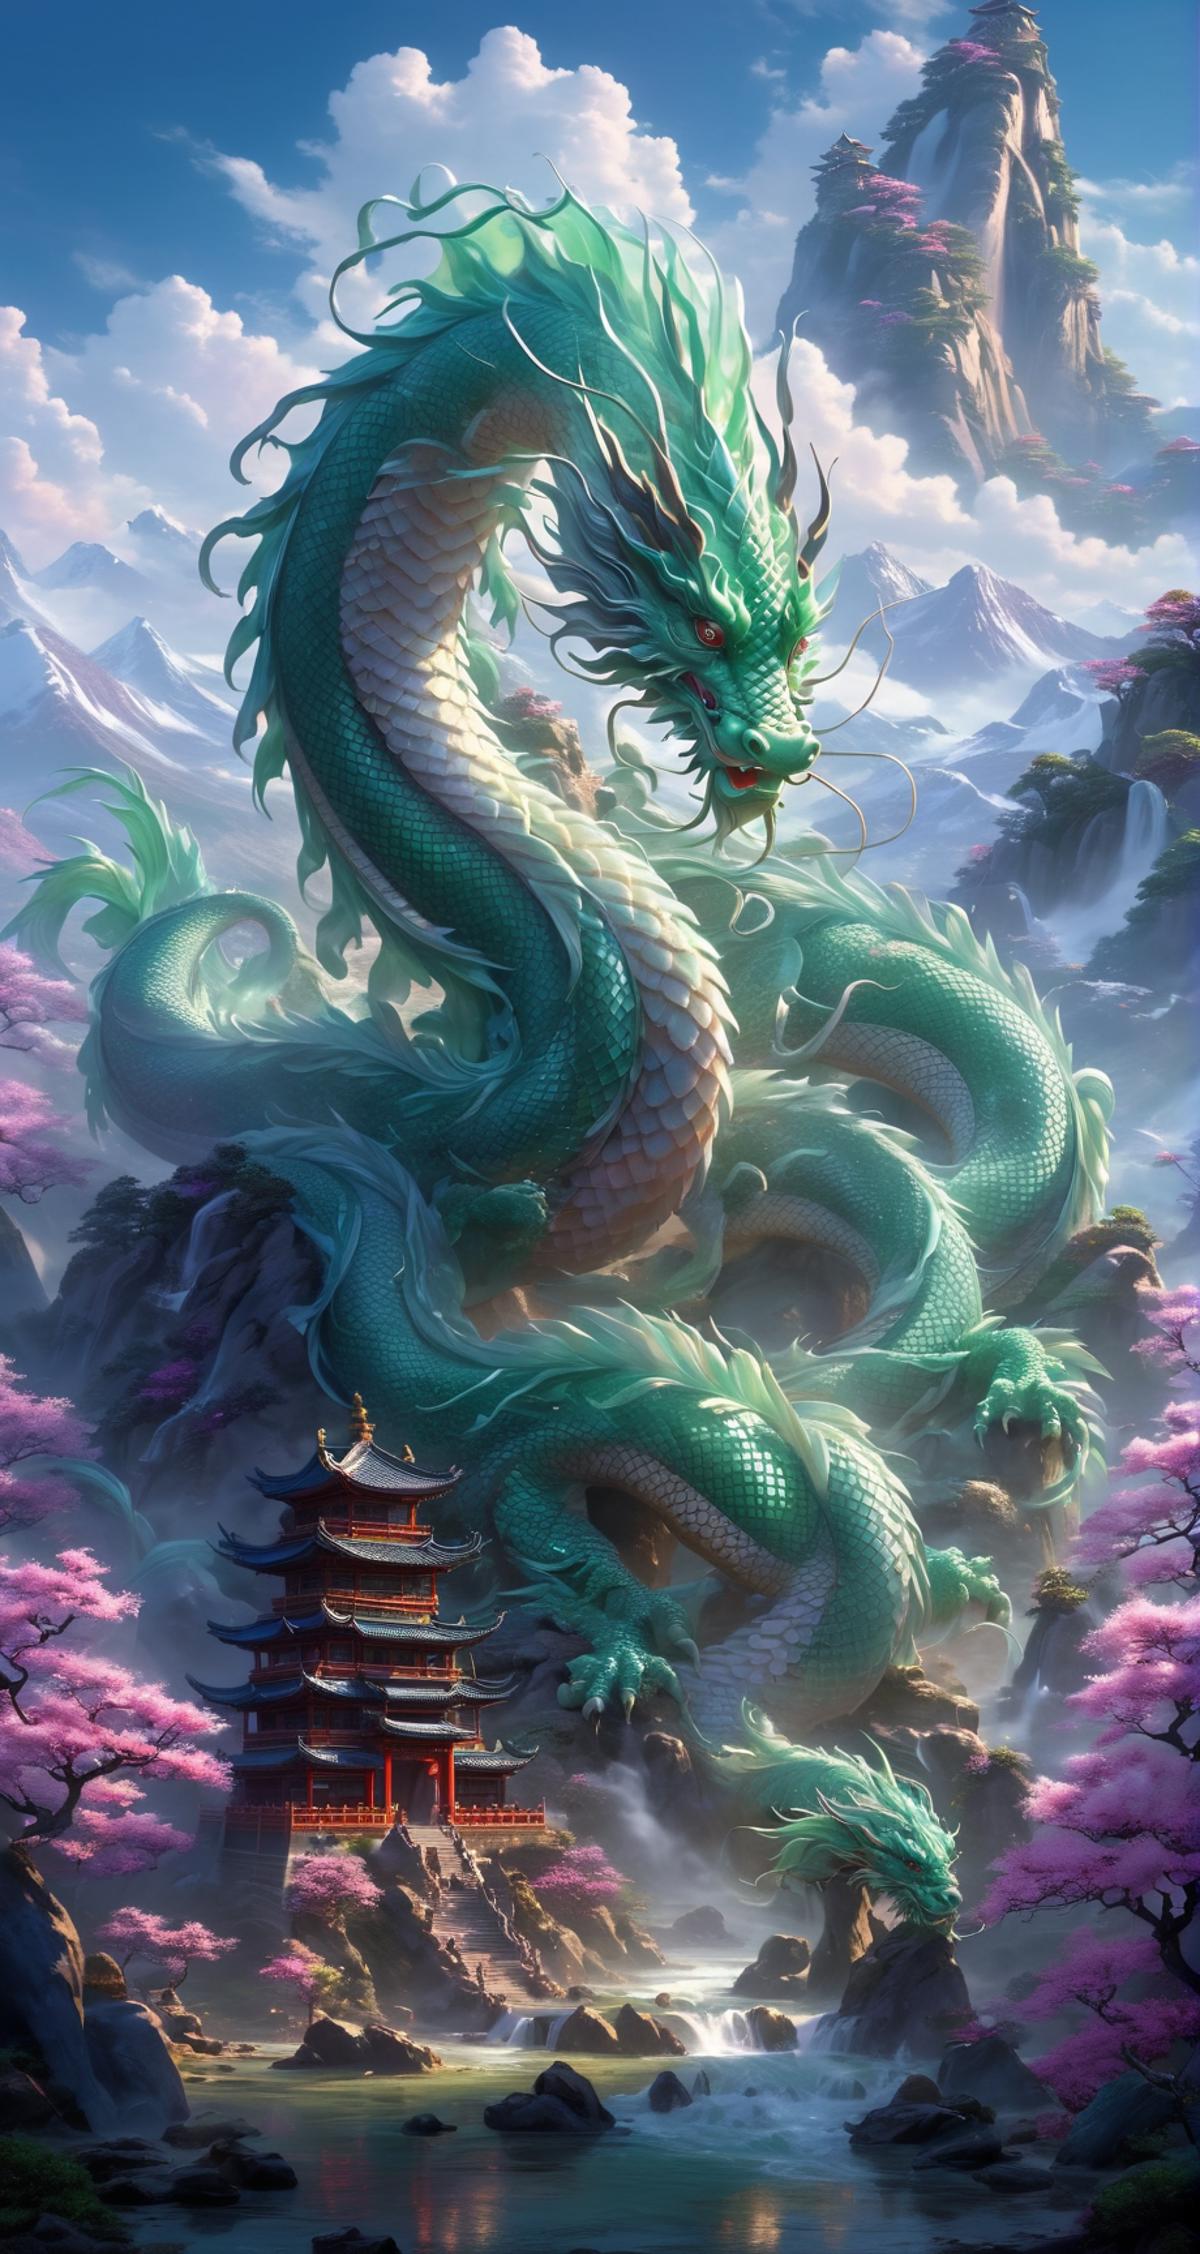 A large green dragon with a purple background, in front of a pagoda.